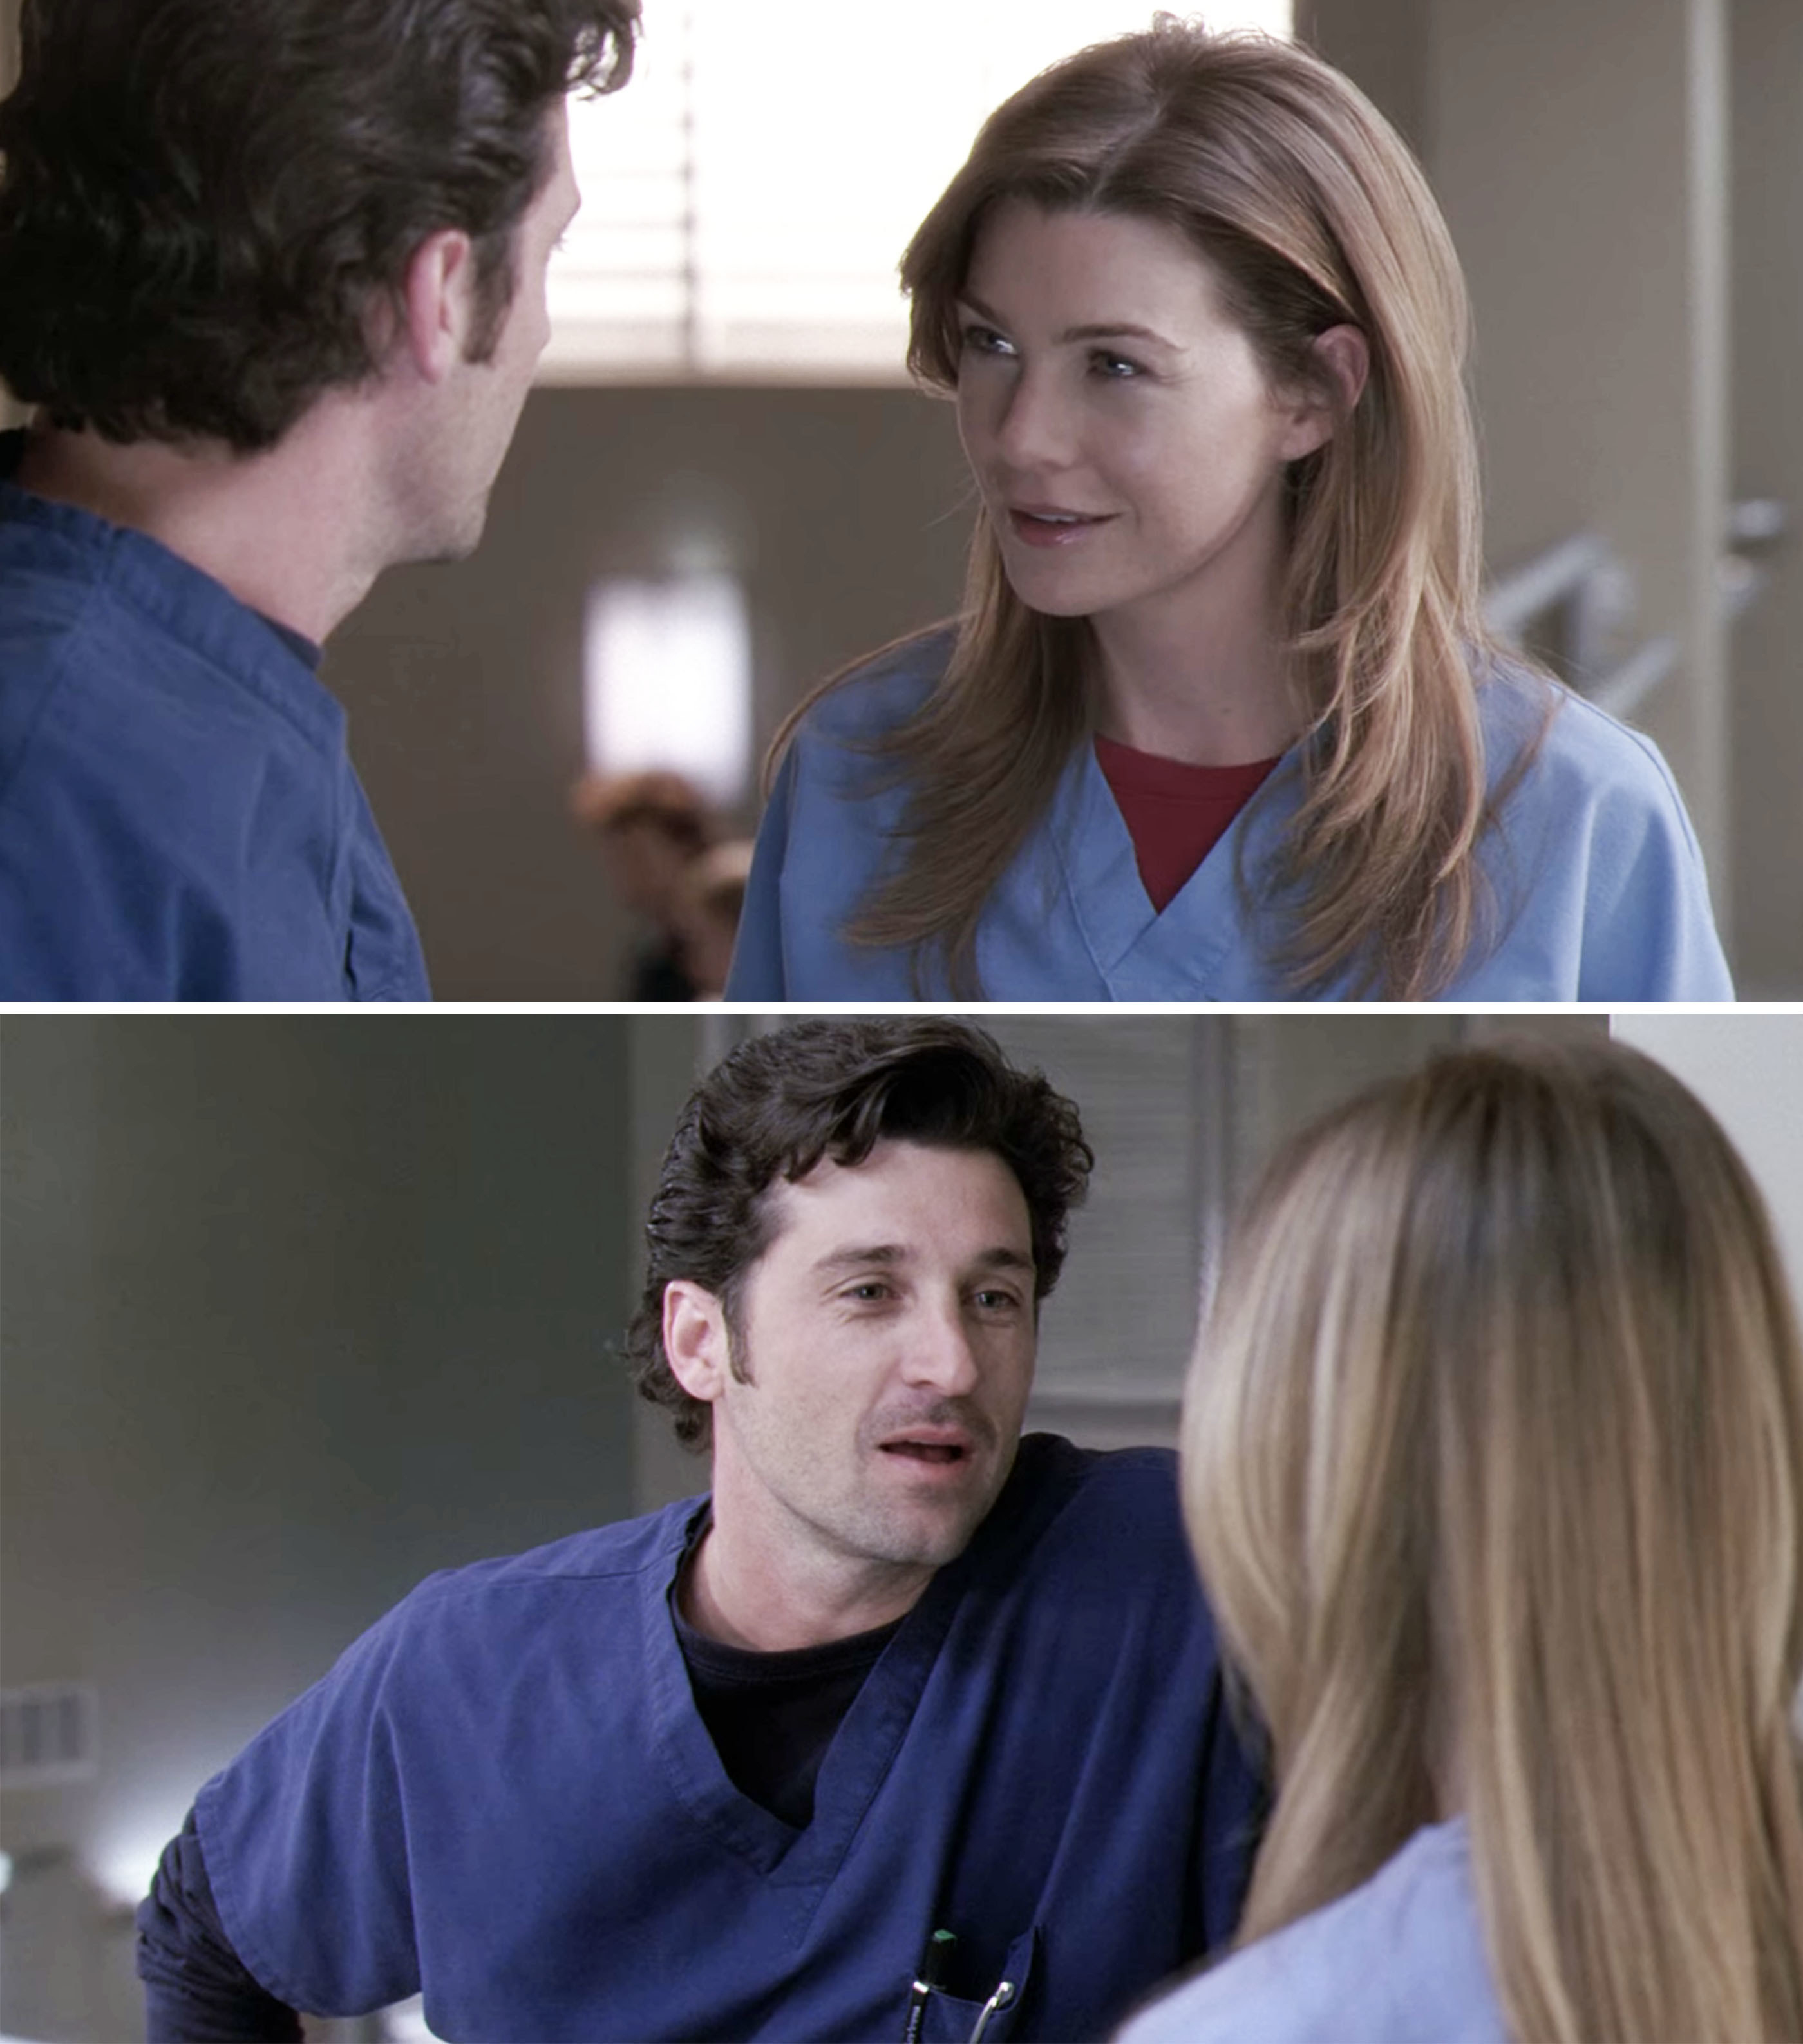 Meredith and Derek having a conversation in the hospital